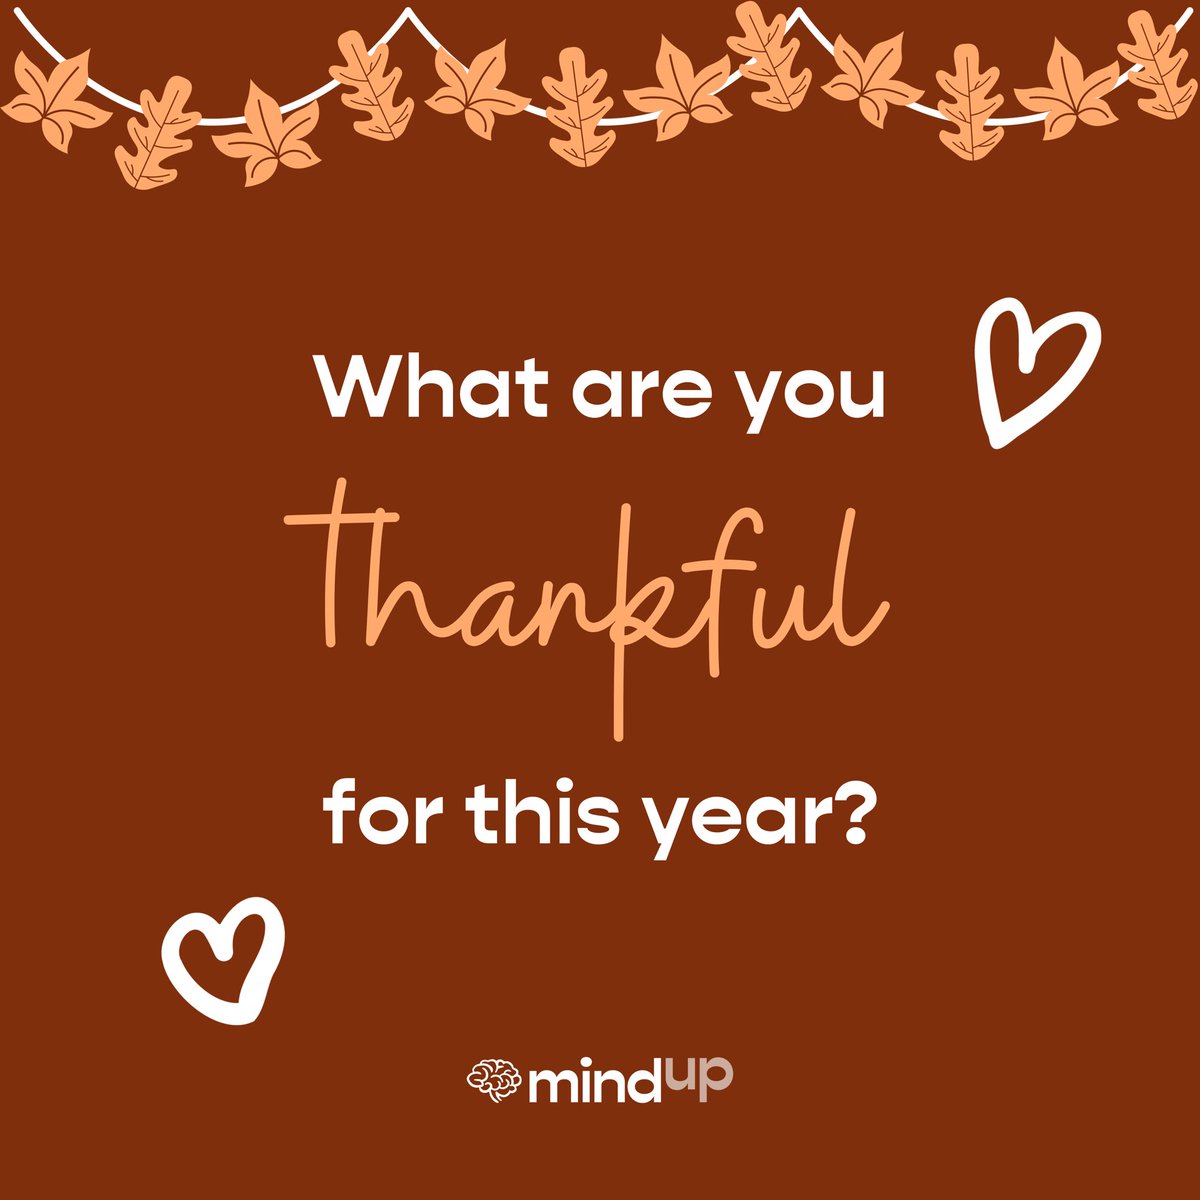 🧡#Gratitude is in the air today! This Thanksgiving, we are celebrating the simple joys that fill our hearts. What are you #thankful for this year? Share below!